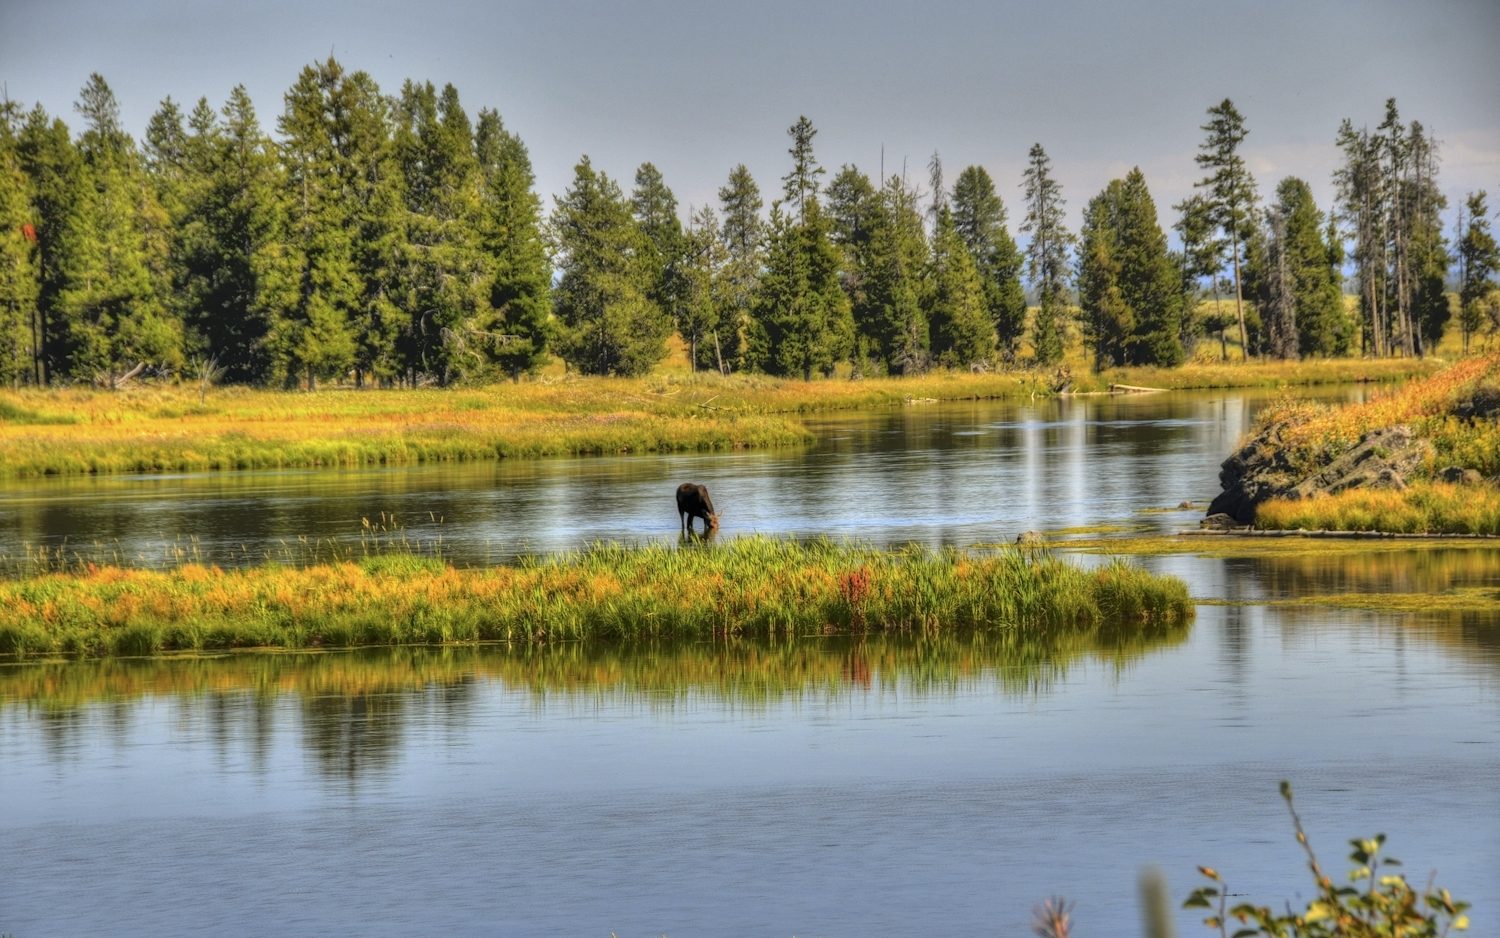 moose grazing in a wetland with trees in the background